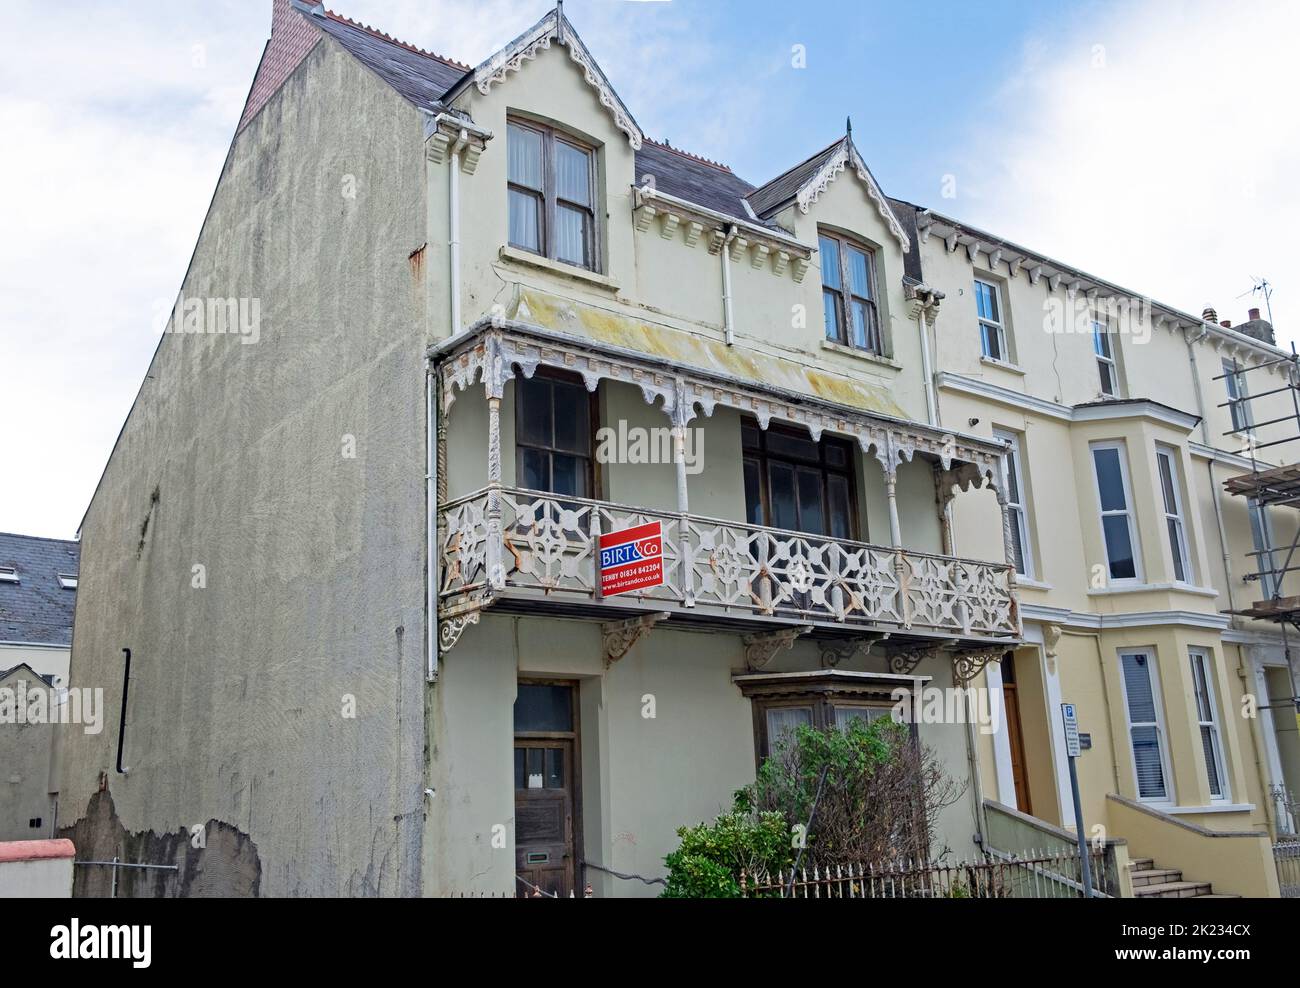 Birt Estate agent sign on exterior of large house property in Tenby Pembrokeshire Wales UK Great Britain  KATHY DEWITT Stock Photo